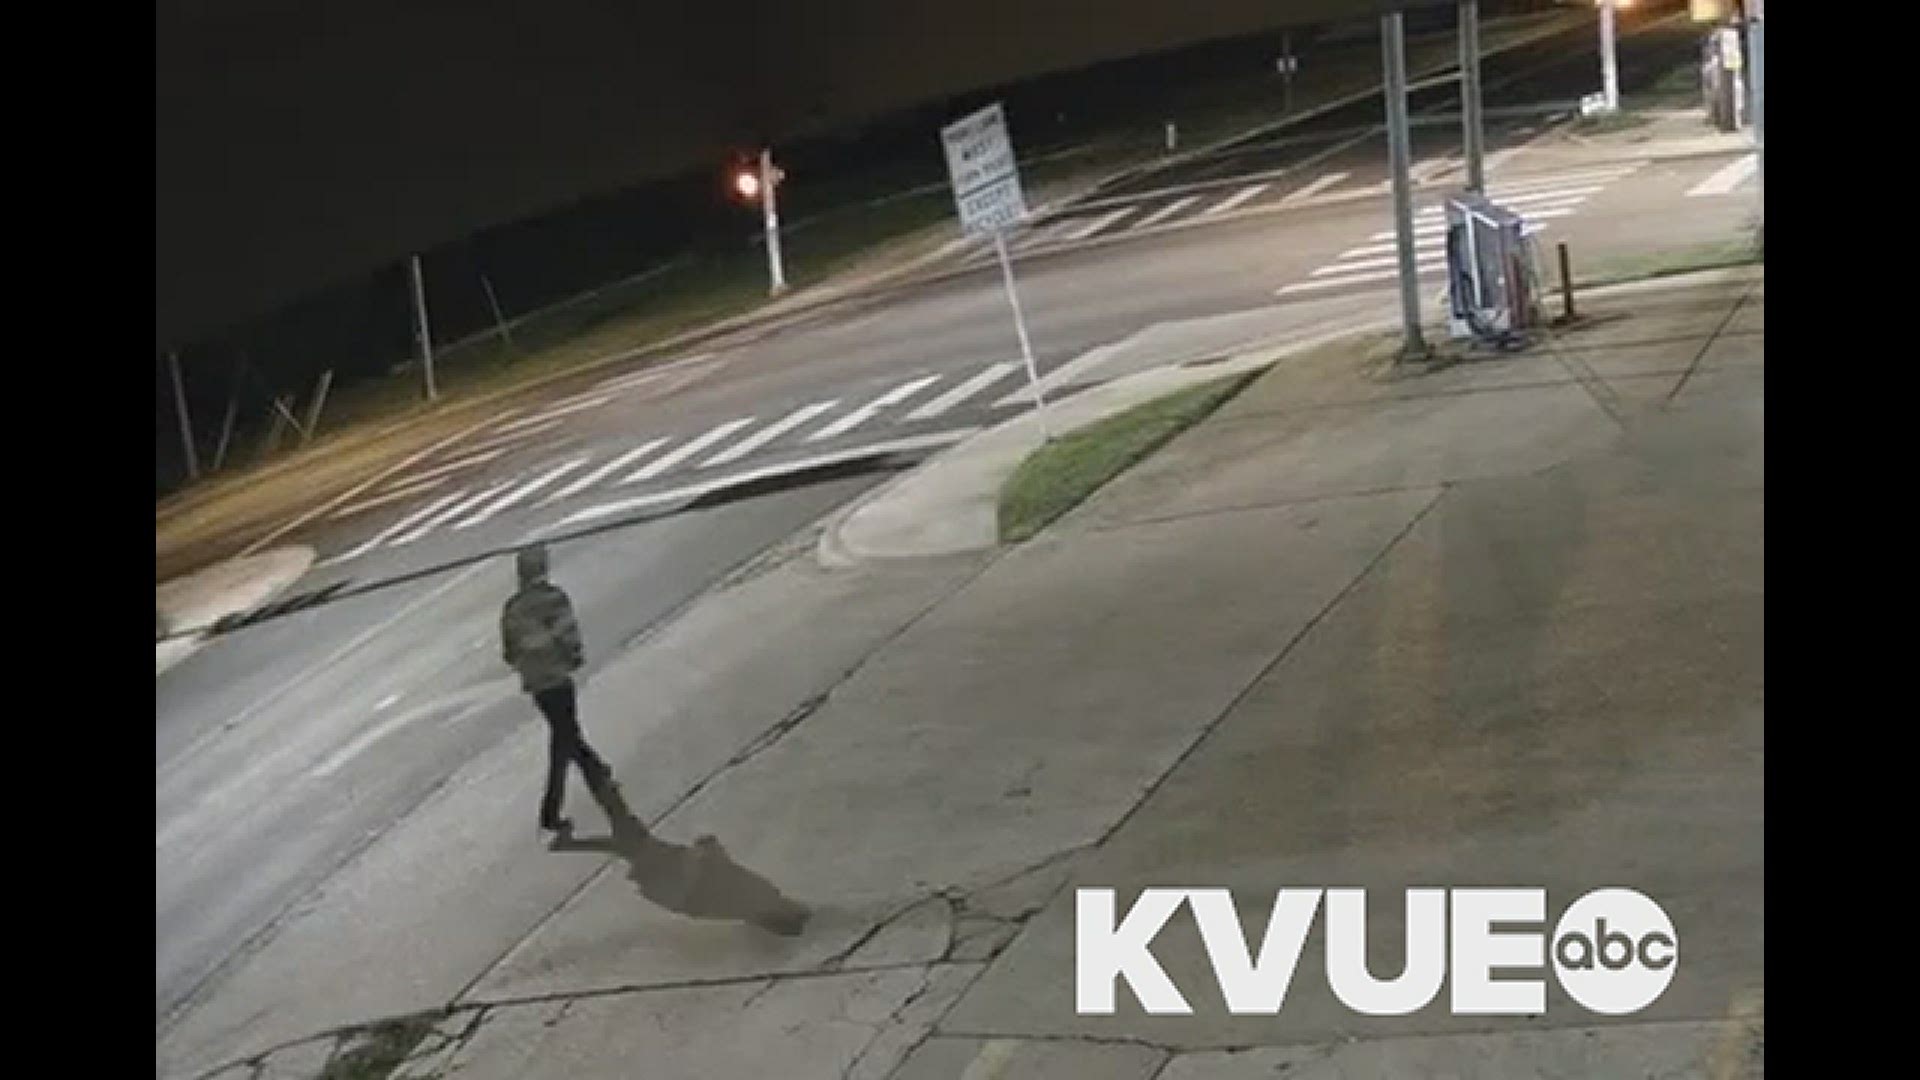 Austin police have released videos as officers continue to investigate after a man was found bleeding at a South Austin bus stop Sept. 16.